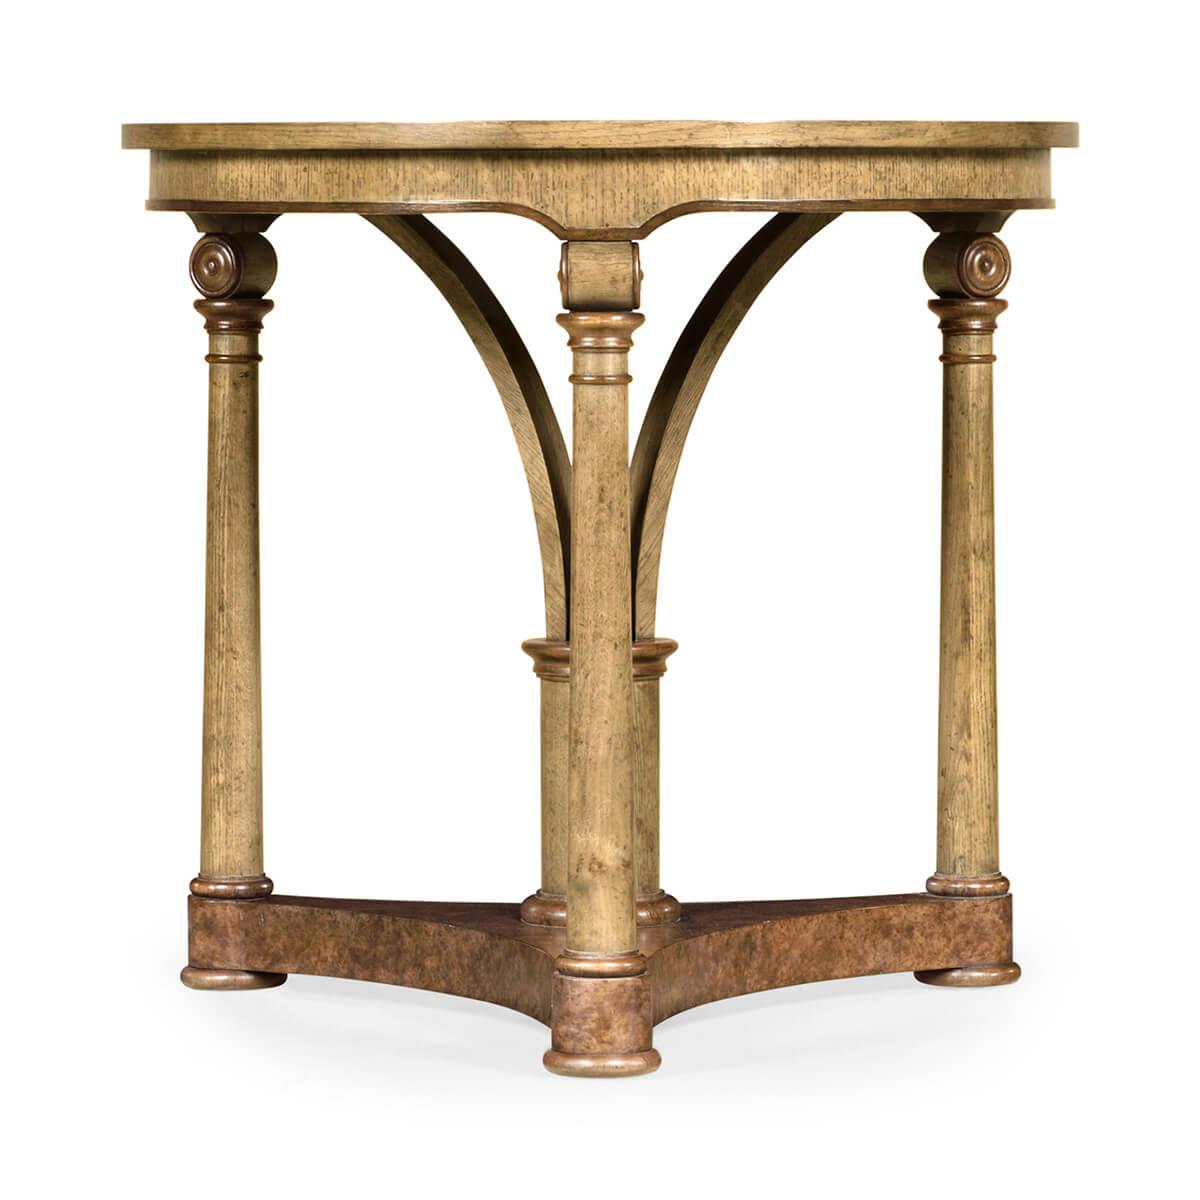 Transitional English light brown oak round side table with both a central pedestal and three leg supports raised on a tripartite base.

Dimensions: 28